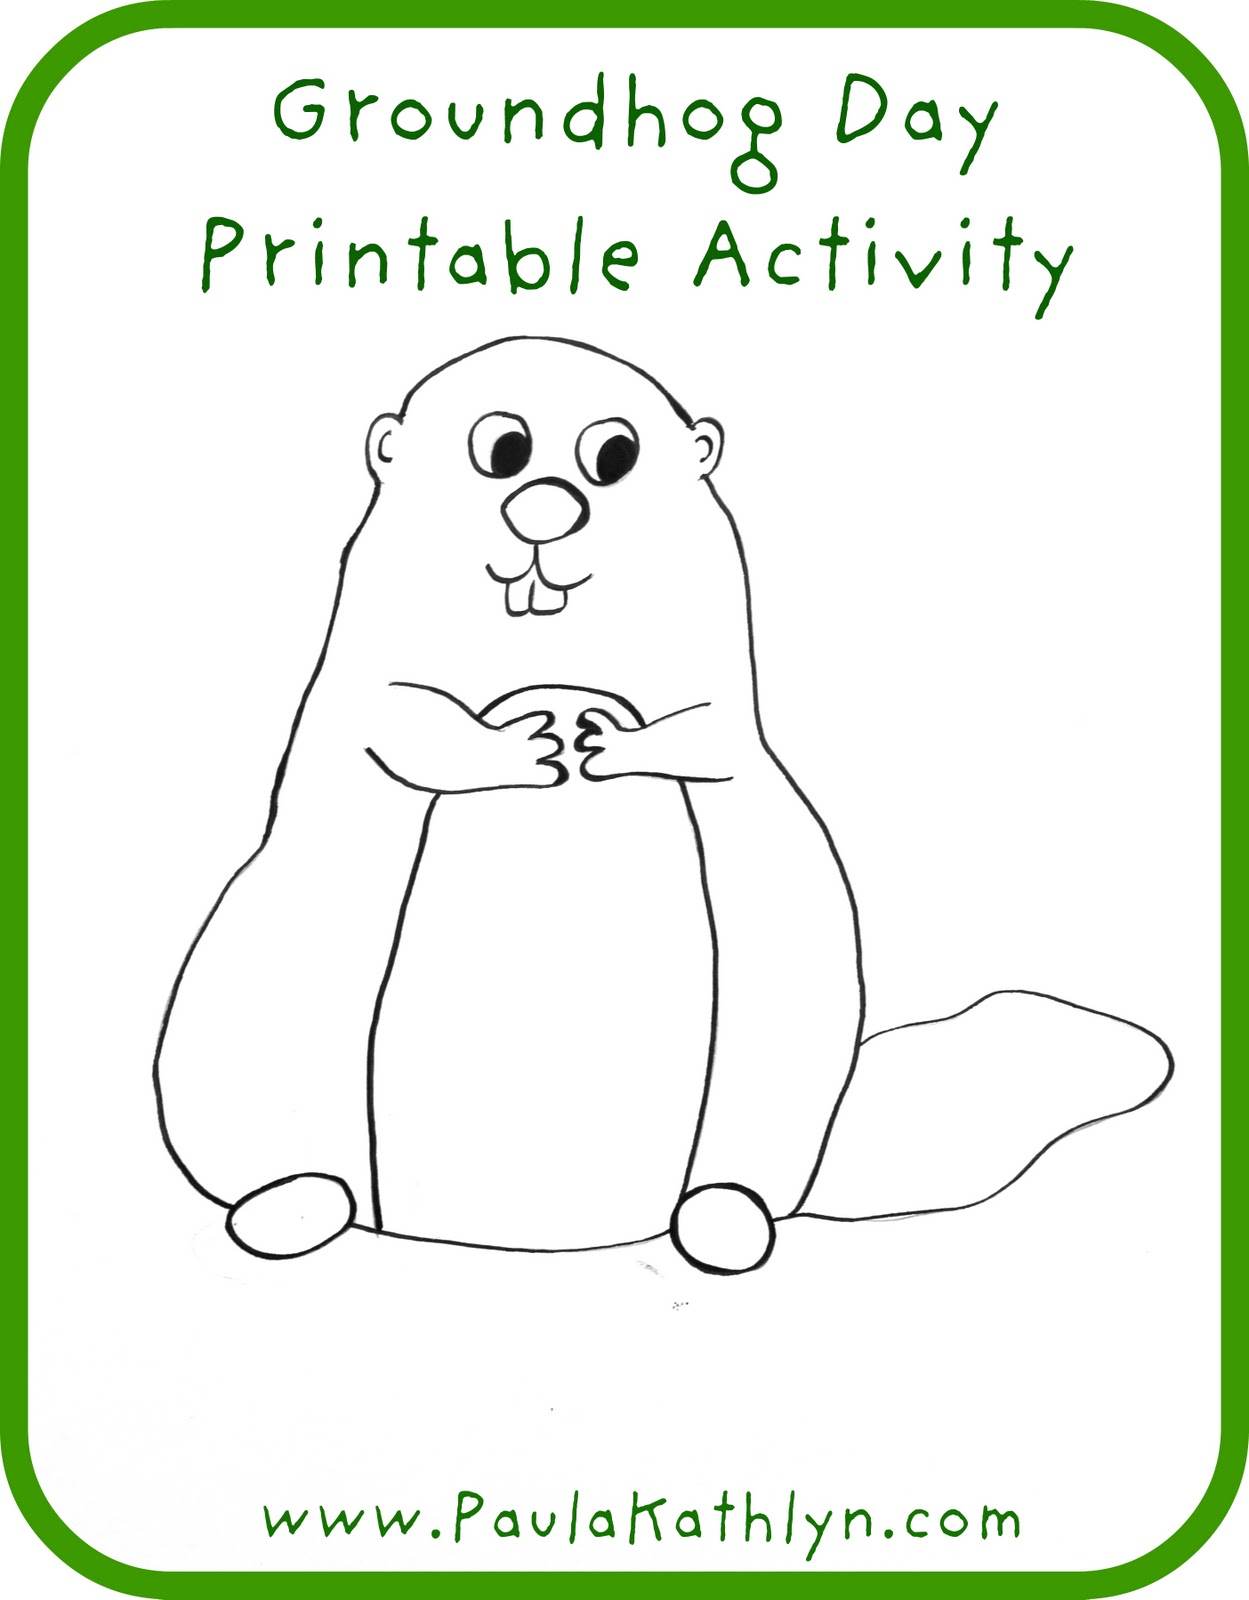 The Patriotic Peacock Groundhog Day Free Printable and Activity